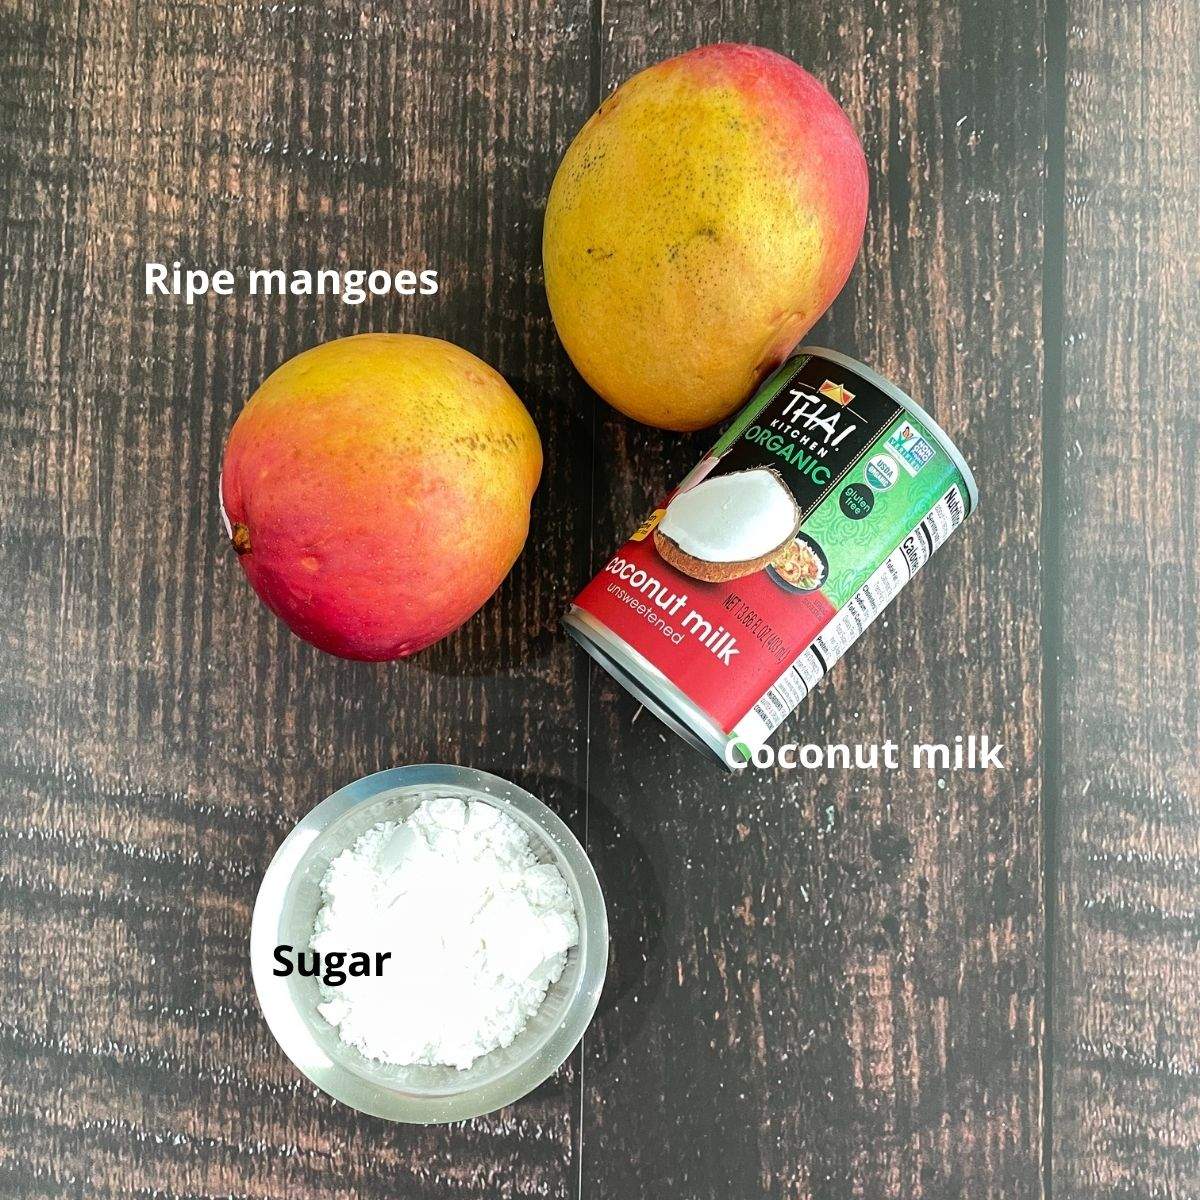 Two ripe mangoes, canned coconut milk, and sugar is placed aon the table for mango ice cream